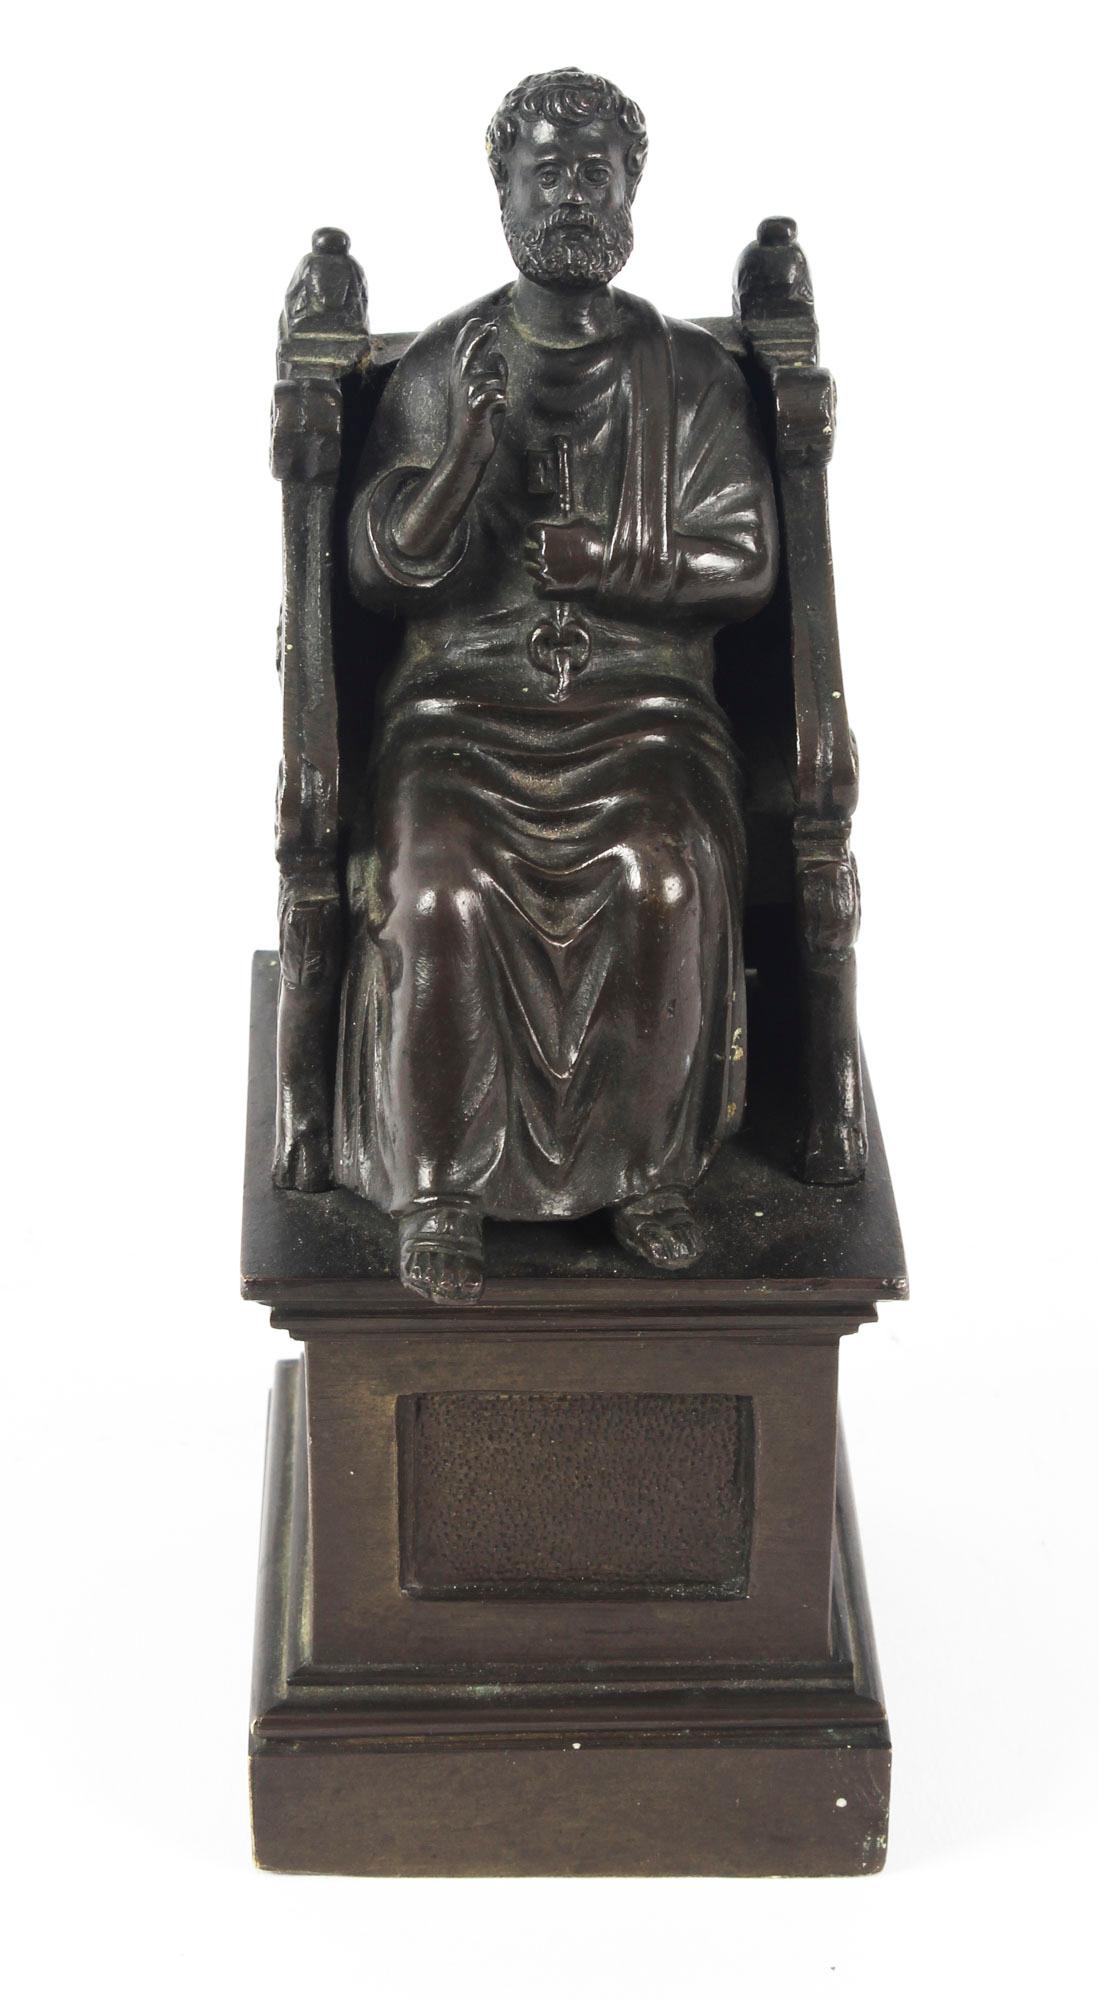 A superb antique Italian Grand Tour patinated bronze sculpture of St Peter seated on a bronze throne, circa 1880 in date.

This patinated bronze sculpture of St. Peter is after the original by Arnolfo di Cambio (1245-1302) in St. Peters basilica